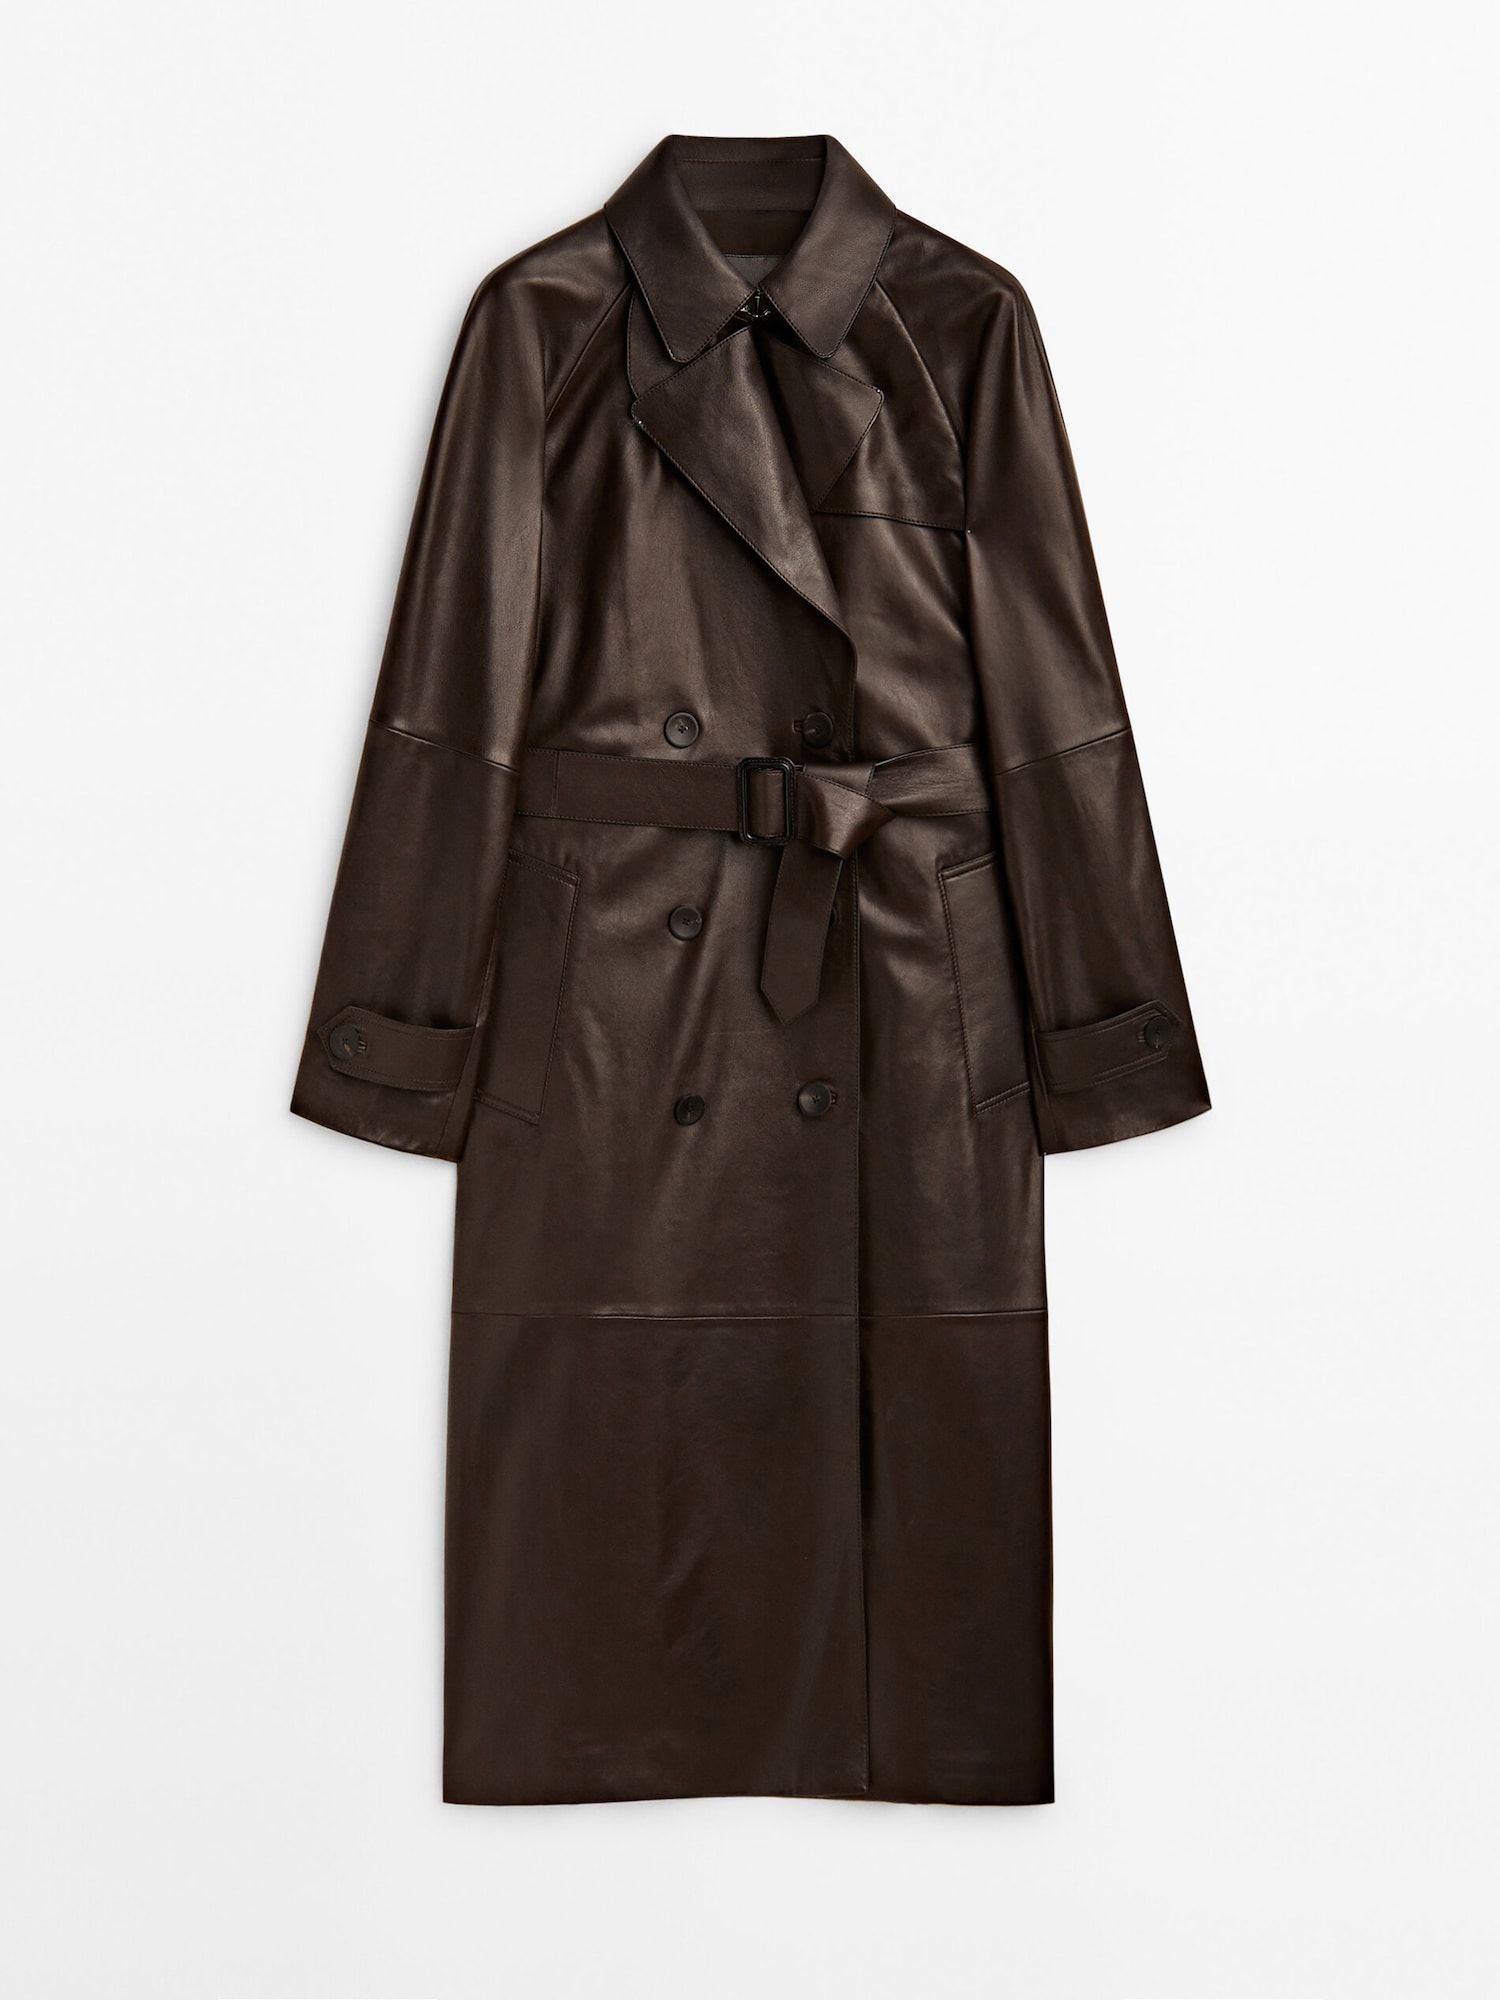 Nappa leather trench-style coat with belt | Massimo Dutti (US)